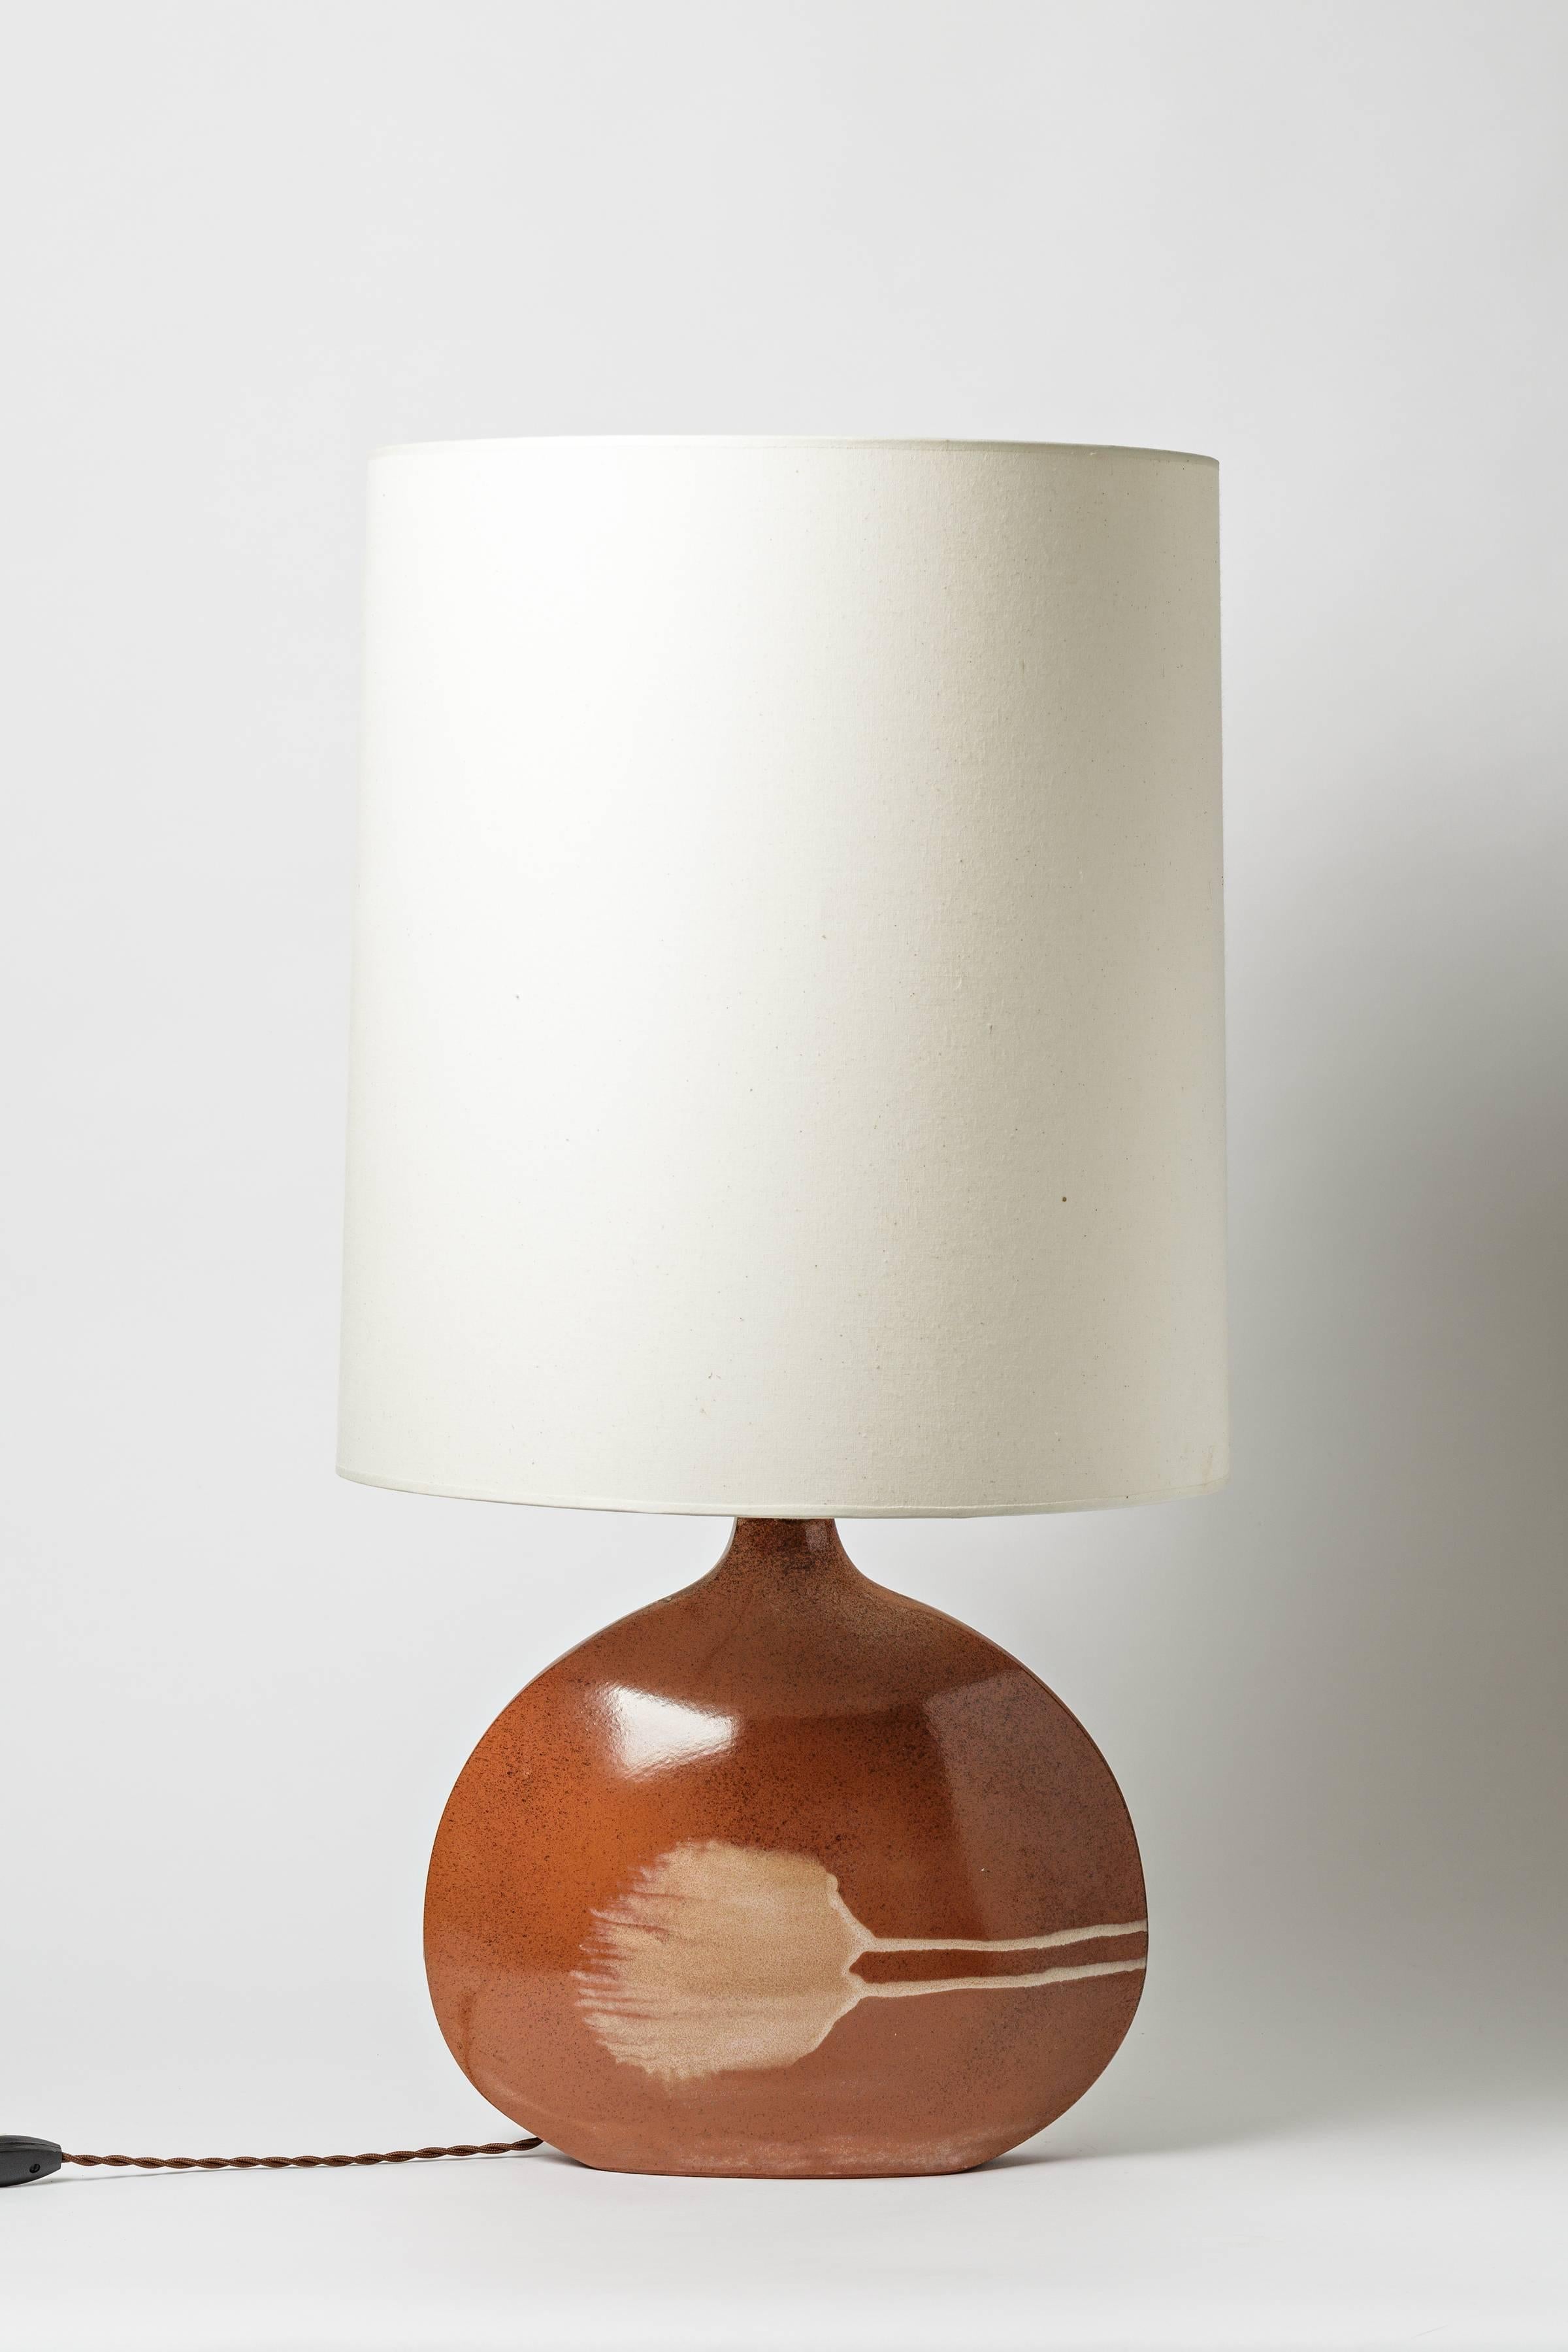 A ceramic lamp with glaze decoration.
Signed at the base Roset.
Unique piece,
circa 1970.
Perfect original conditions.
Sold with a new electrical system.
Sold without lampshade.

Dimensions with electrical system: 16 ' x 14 ' x 4 '